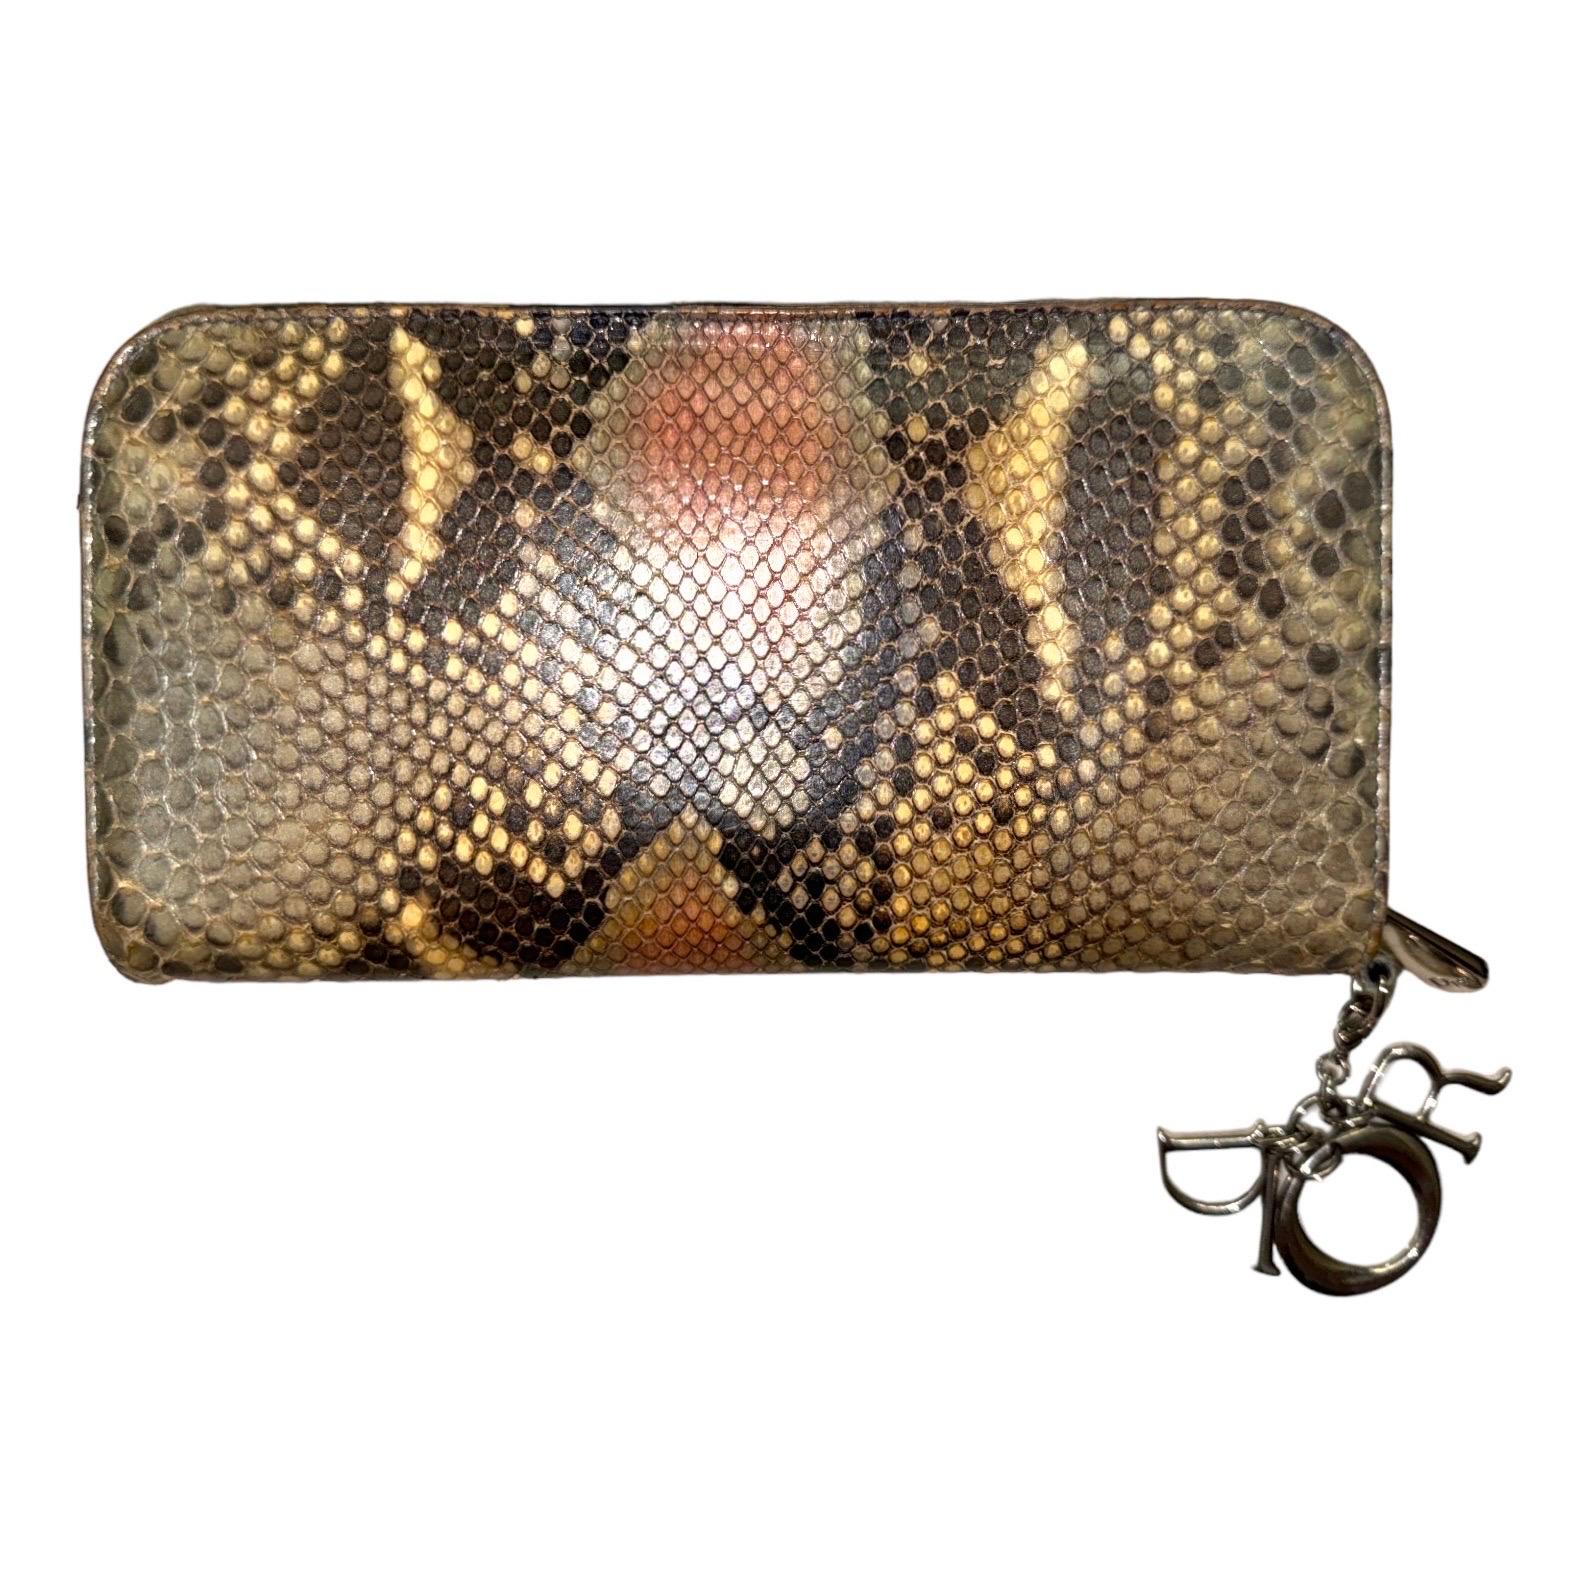 A wonderful Lady Dior exotic skin wallet by Christian Dior

Details:

Finest python skin
Detachable 'D.I.O.R.' charm
Blue leather lining
3 compartments
12 card slots
2 patch pockets
1 zipped pocket
Made in Italy

This Lady Dior Voyageur wallet is